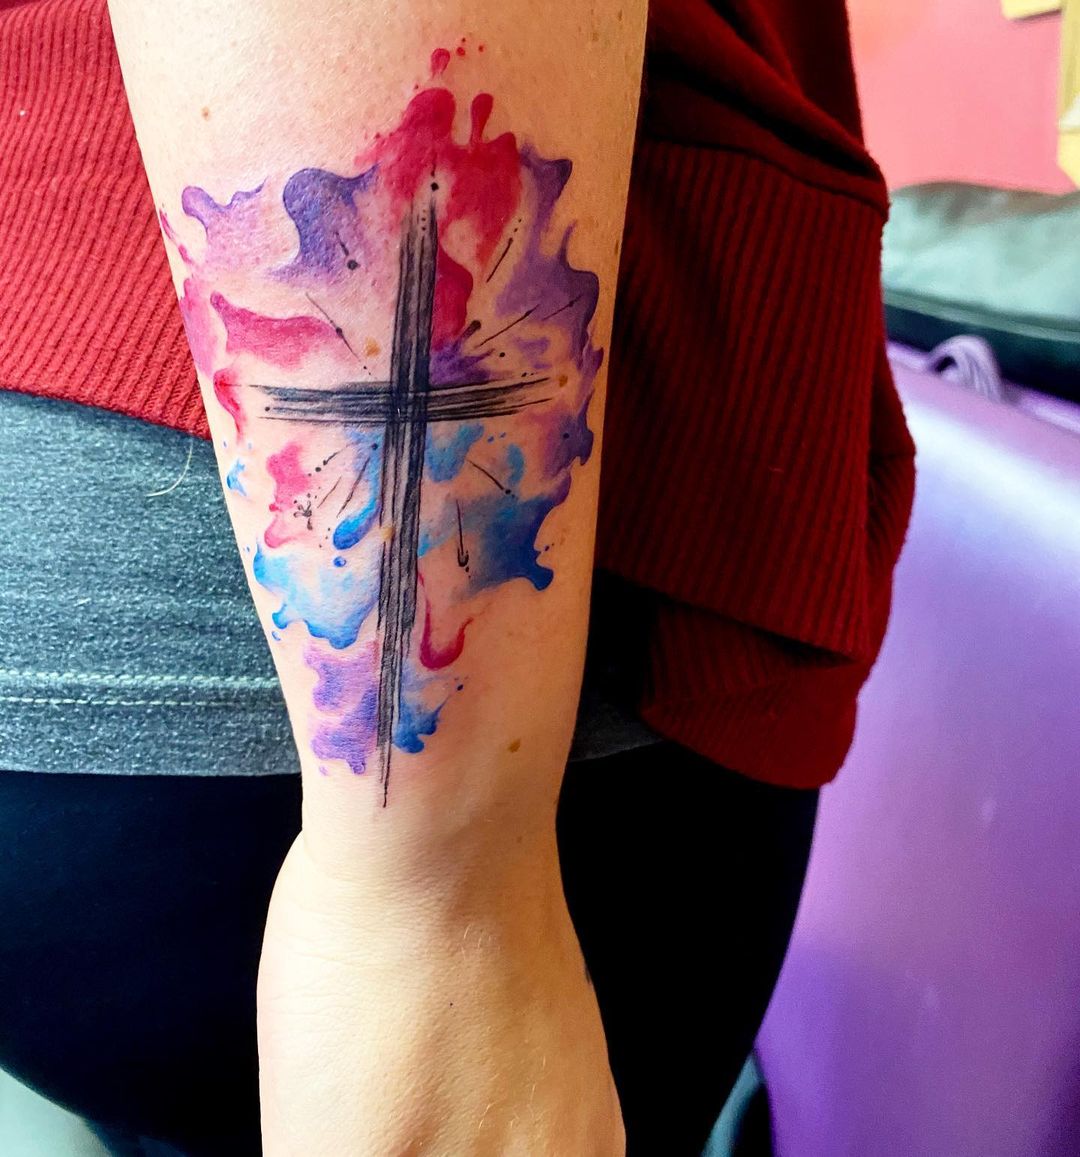 Simple Cross Tattoo Designs: Watercolor Blast with a Streaked Cross Tattoos